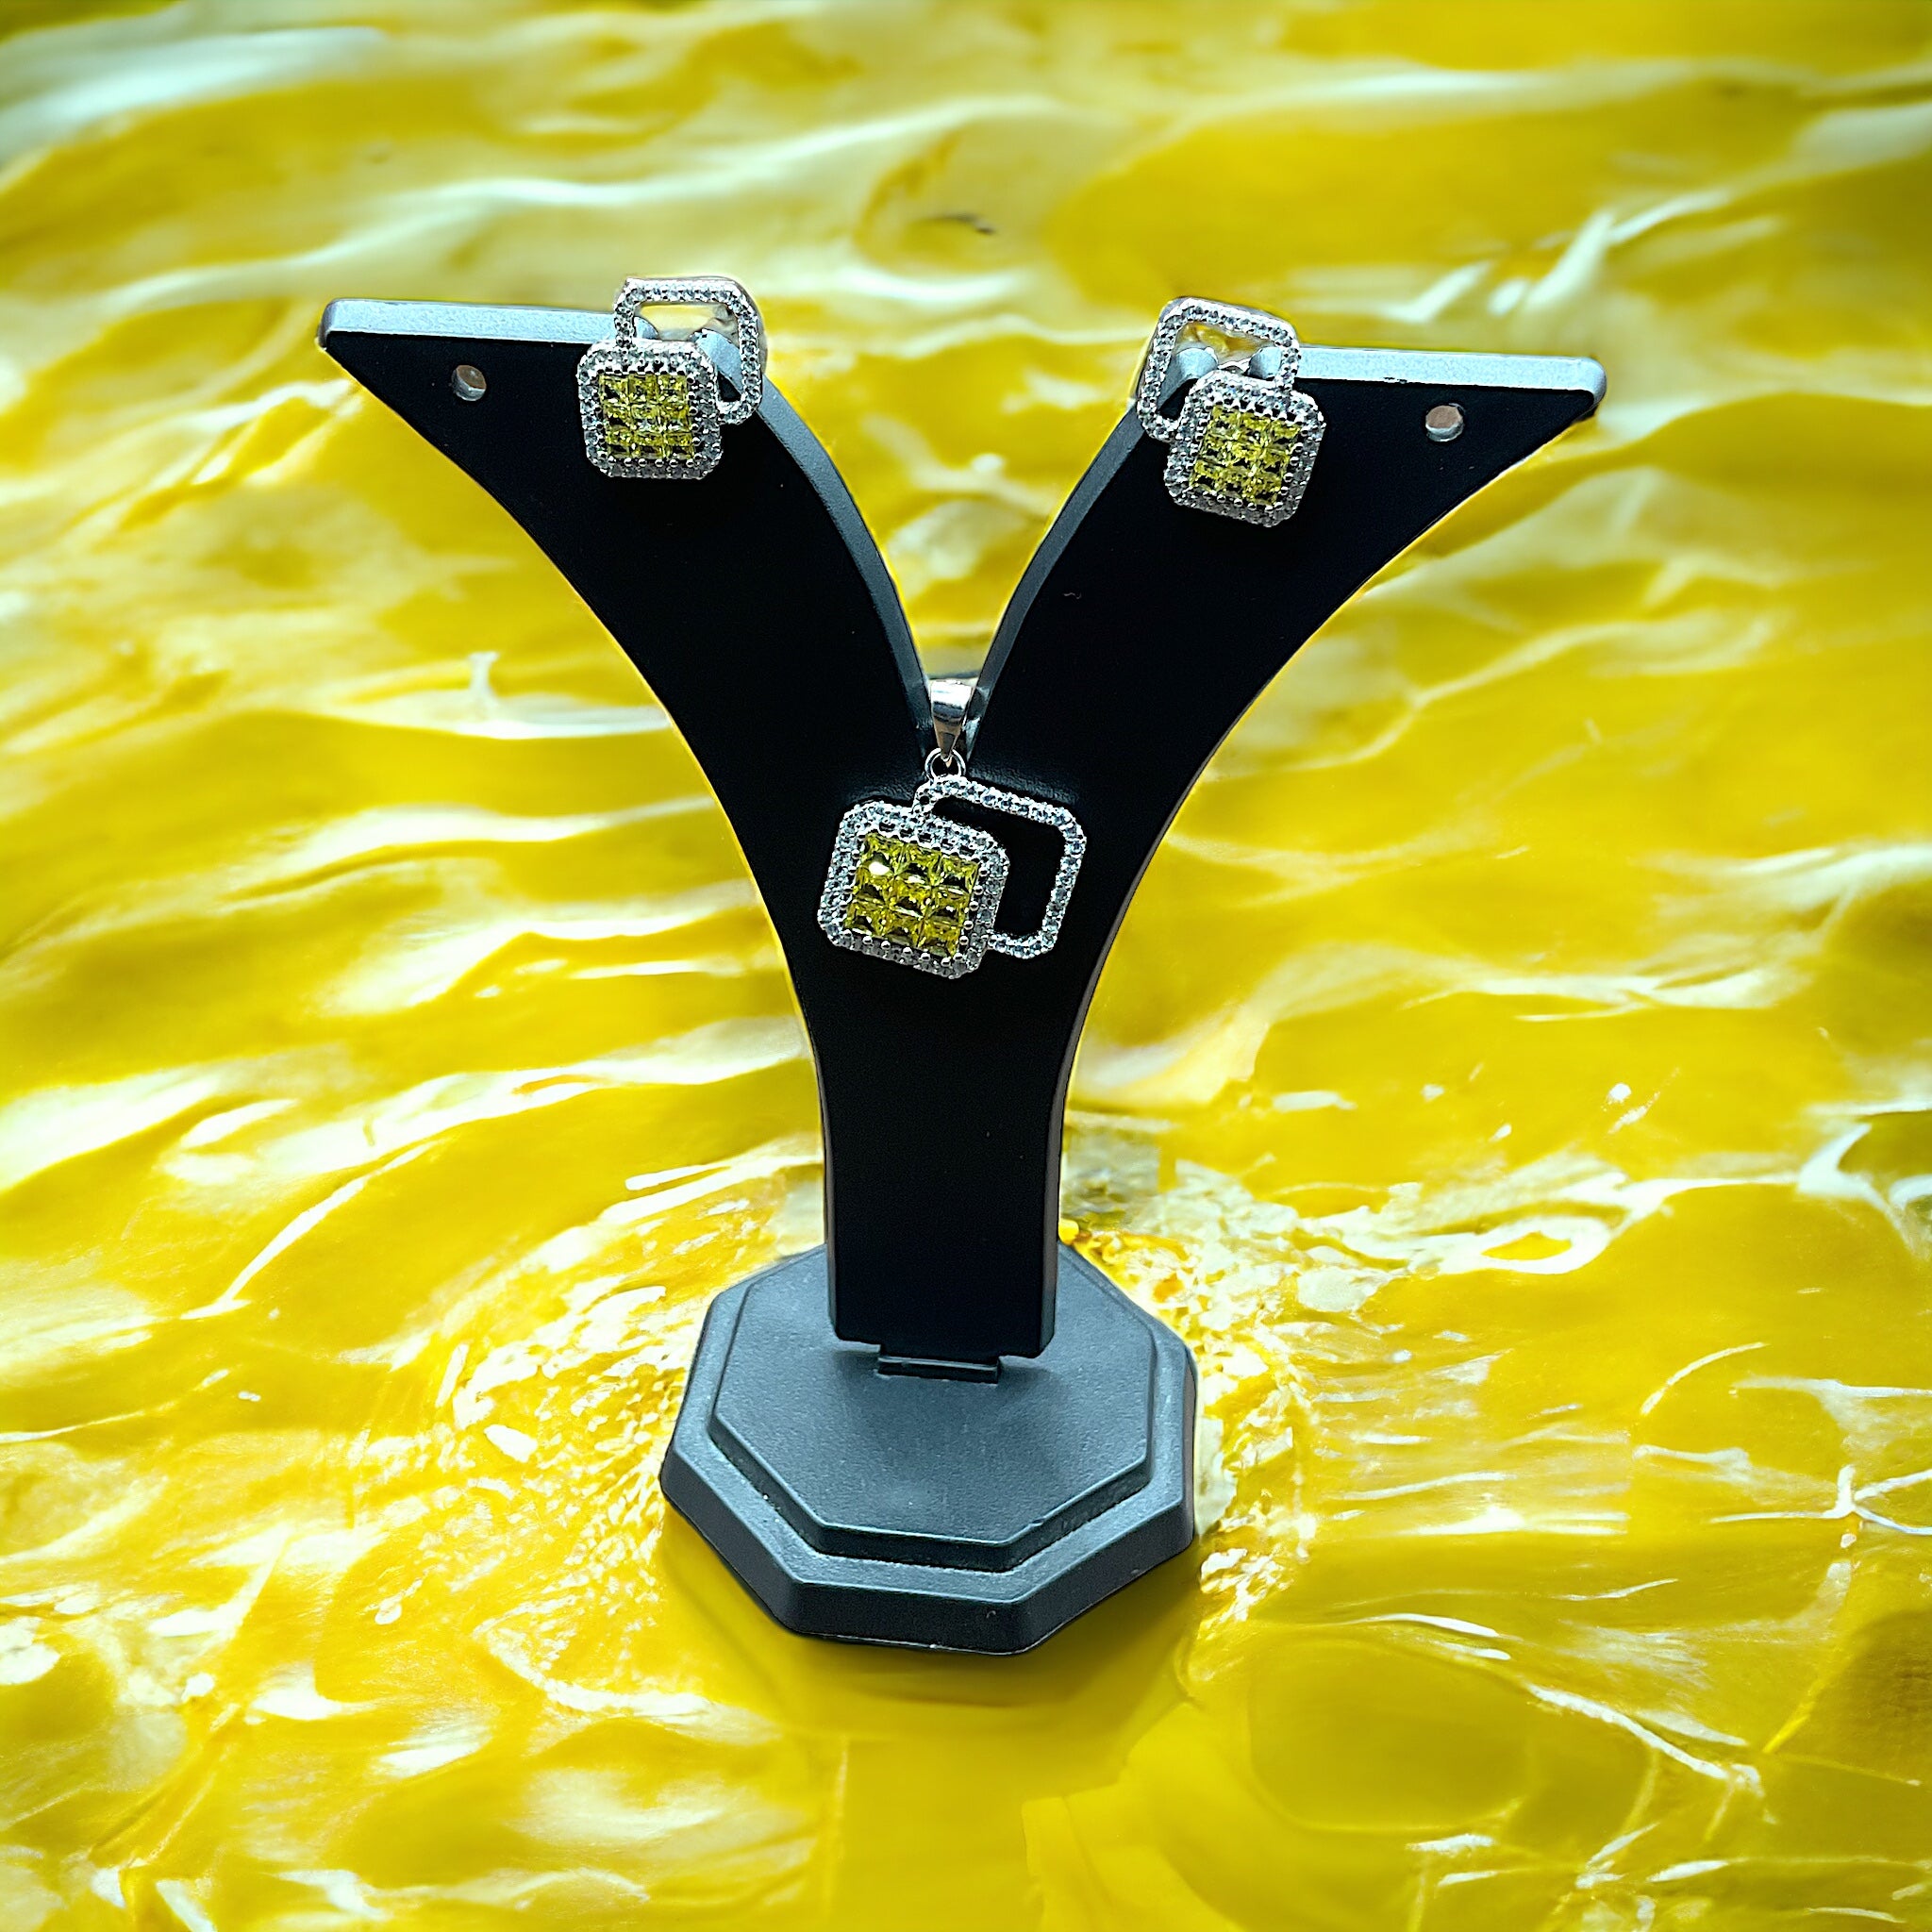 a pair of black and silver earrings sitting on top of a yellow surface